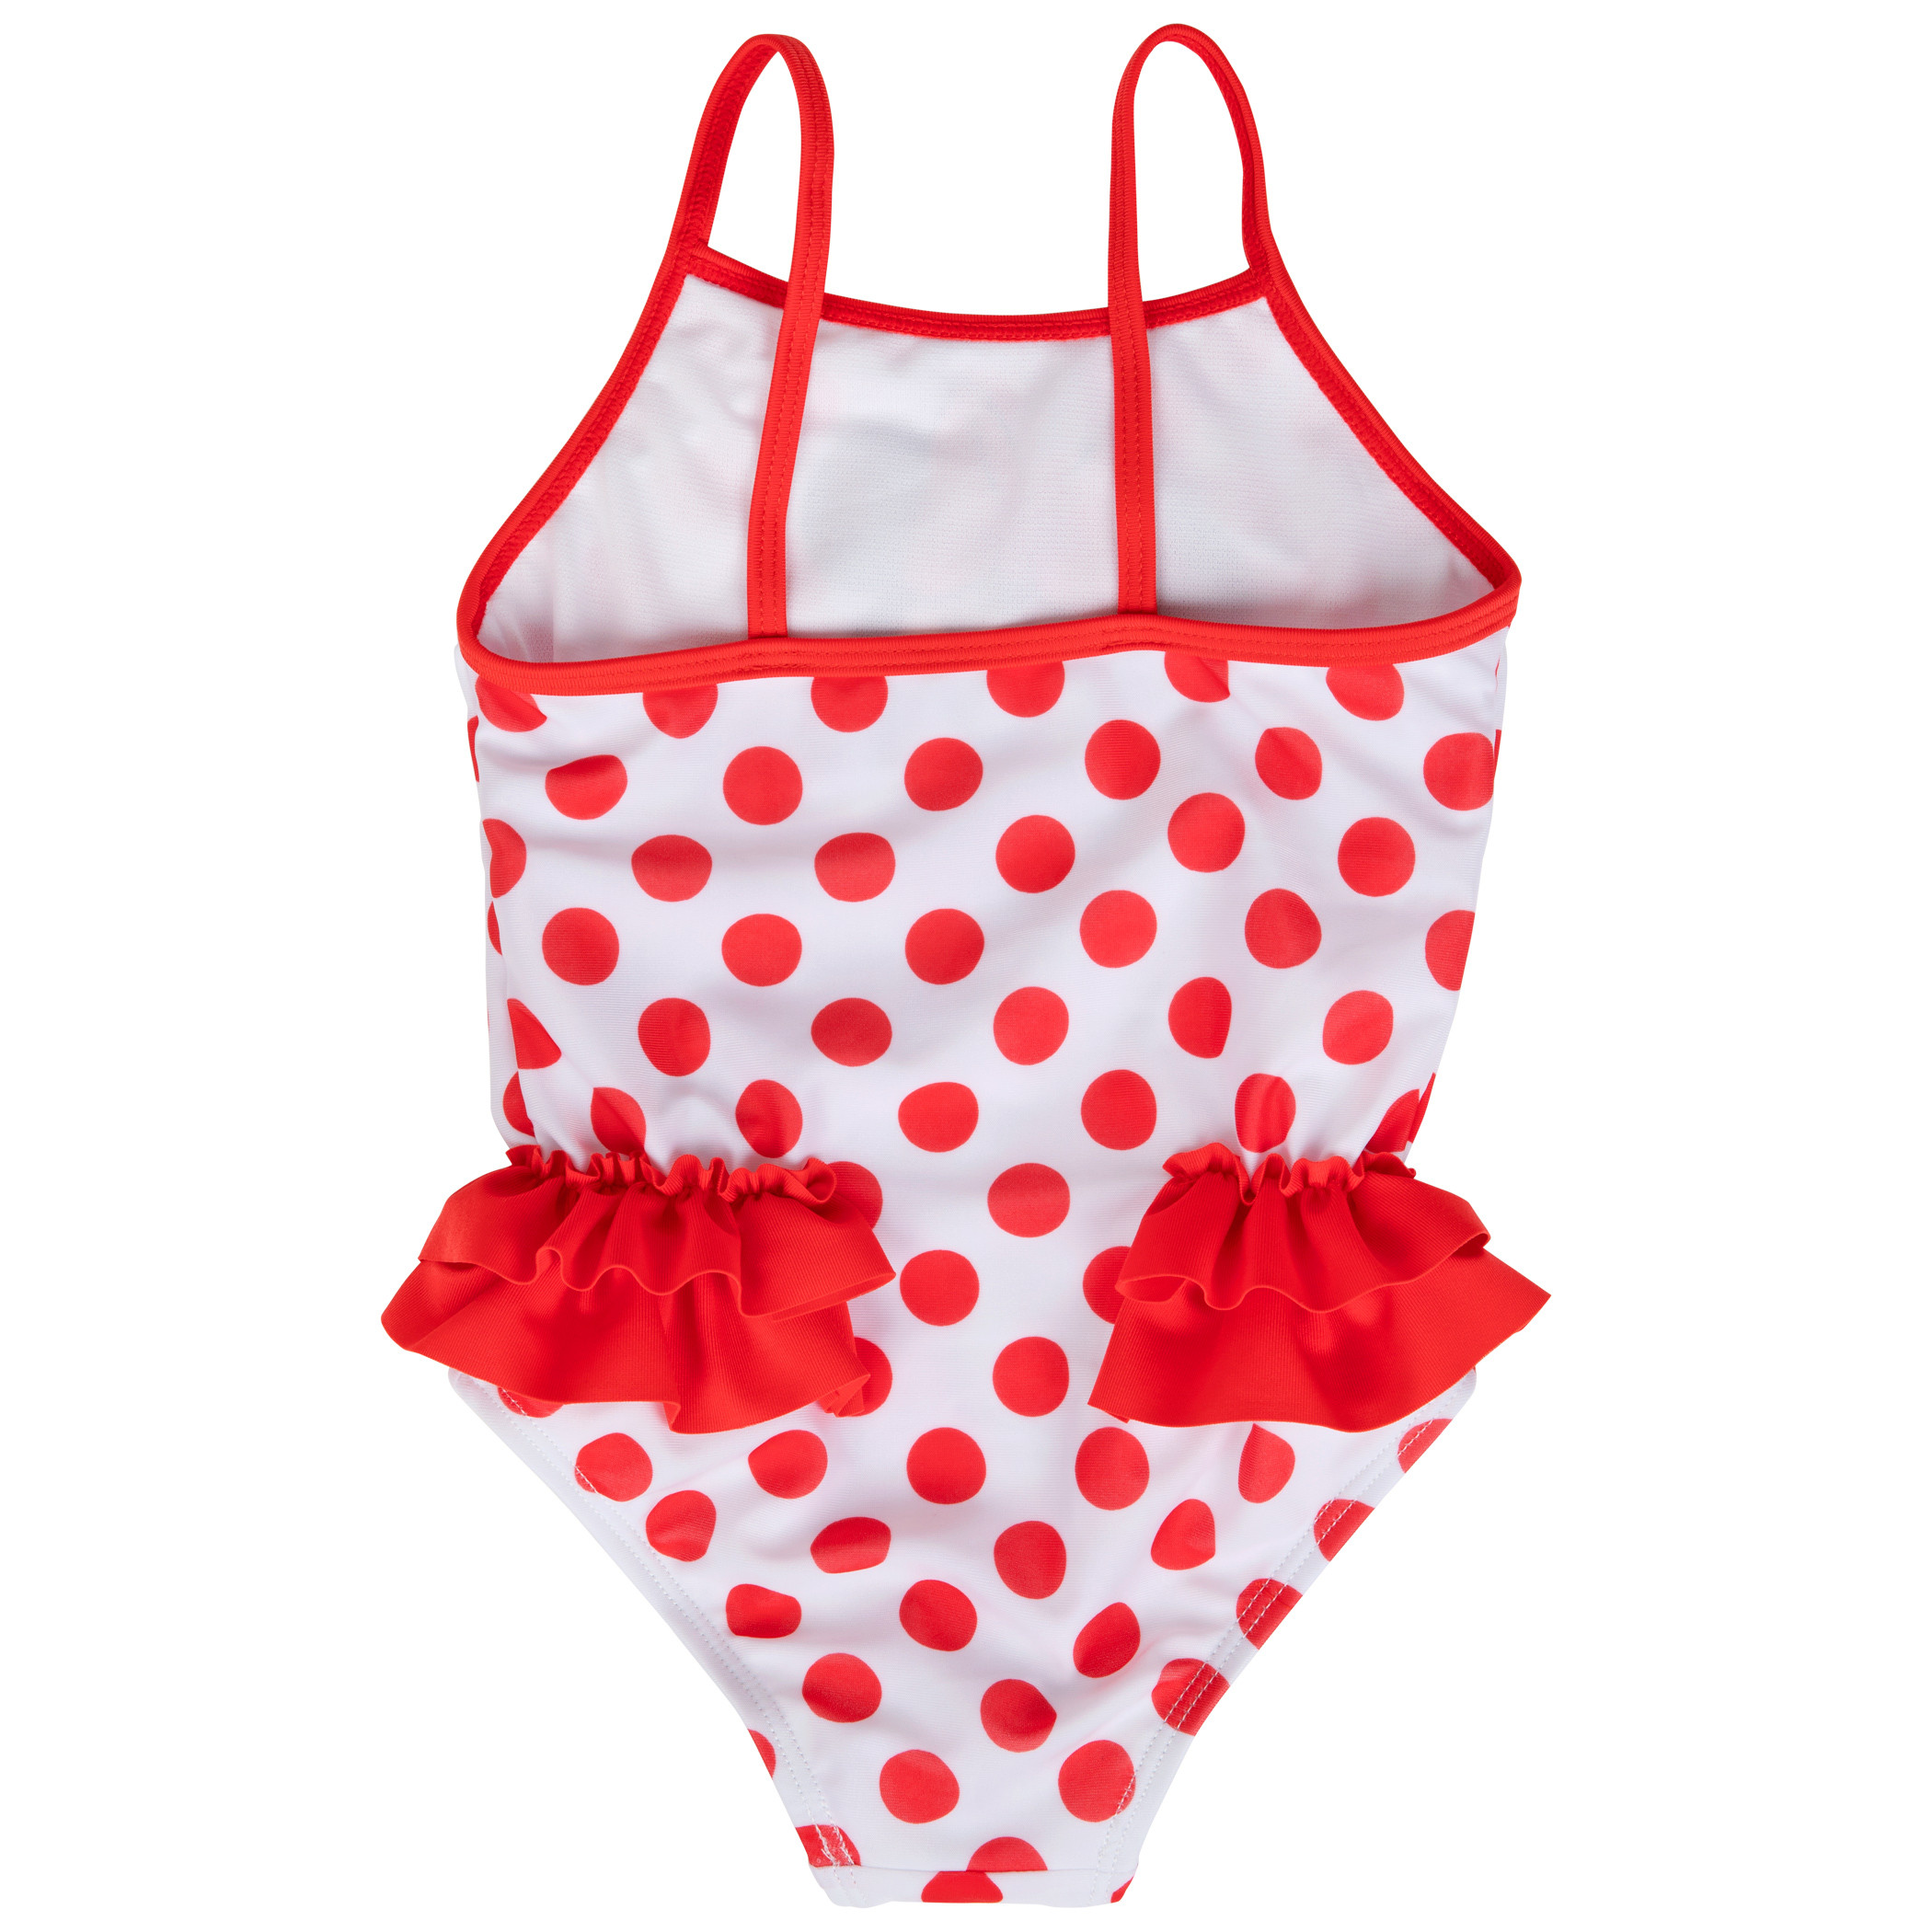 Disney Minnie Mouse Red Polka Dot One Piece Toddlers Swimsuit